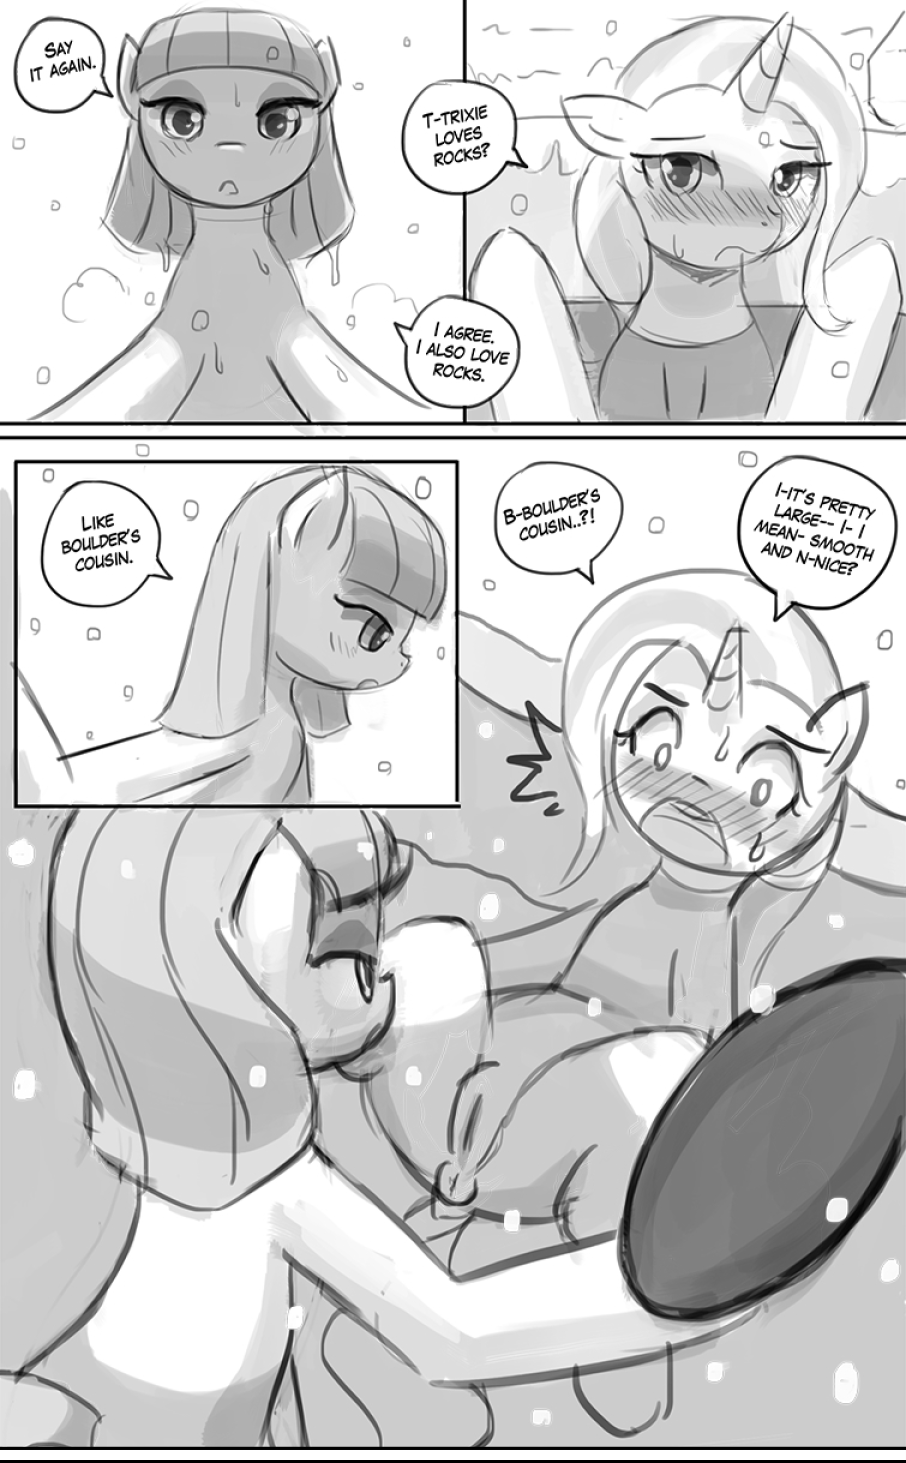 Homesick pt2: a hearths warming eve porn comic picture 12